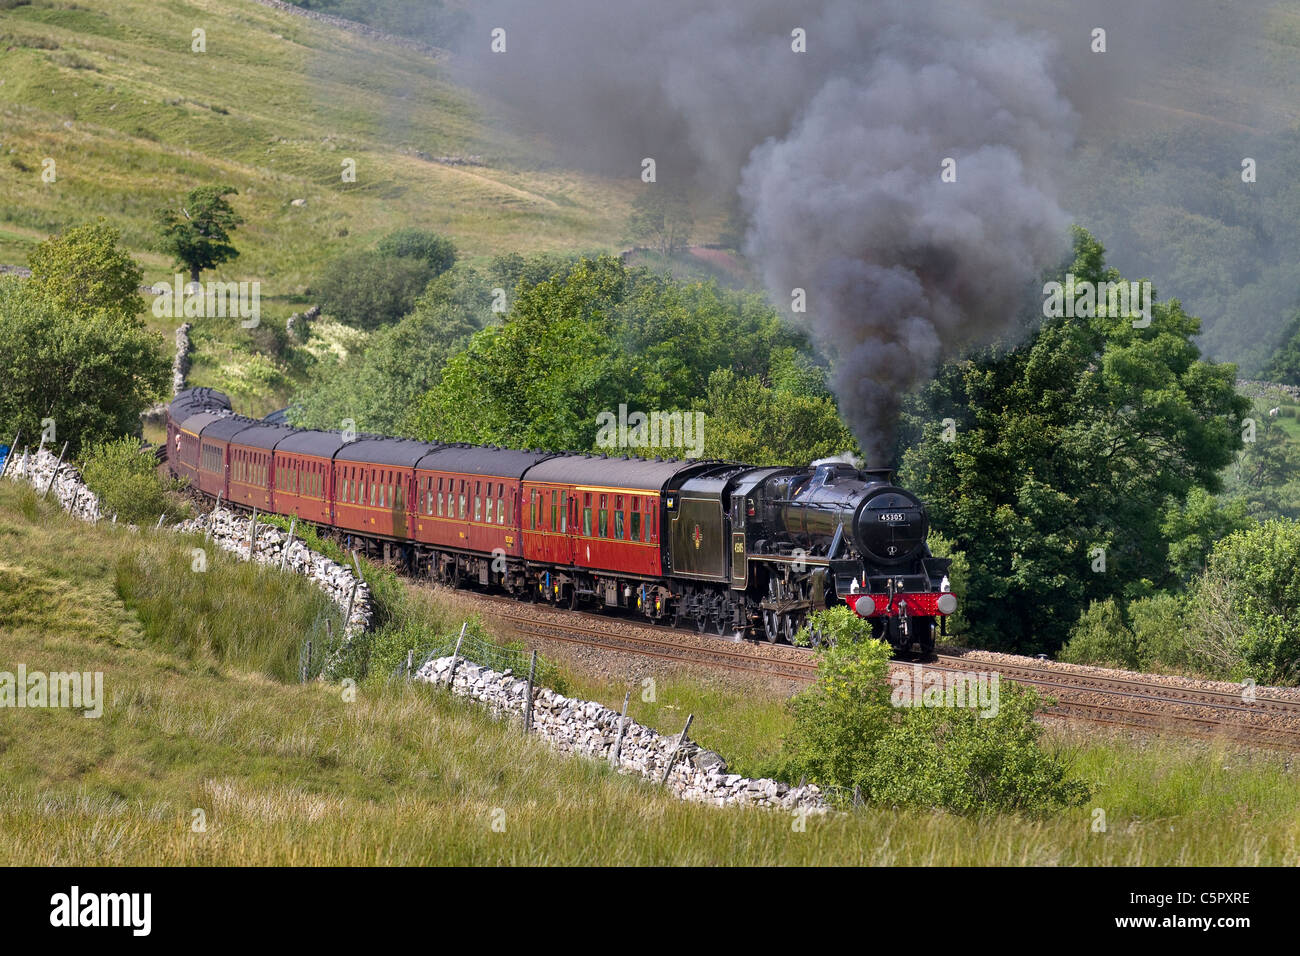 Stanier 'Black 5MT' steam loco No 45305 Preserved British steam locomotive at Ais Gill, Train & carriages on the Settle-Carlisle Line, Cumbria, UK Stock Photo